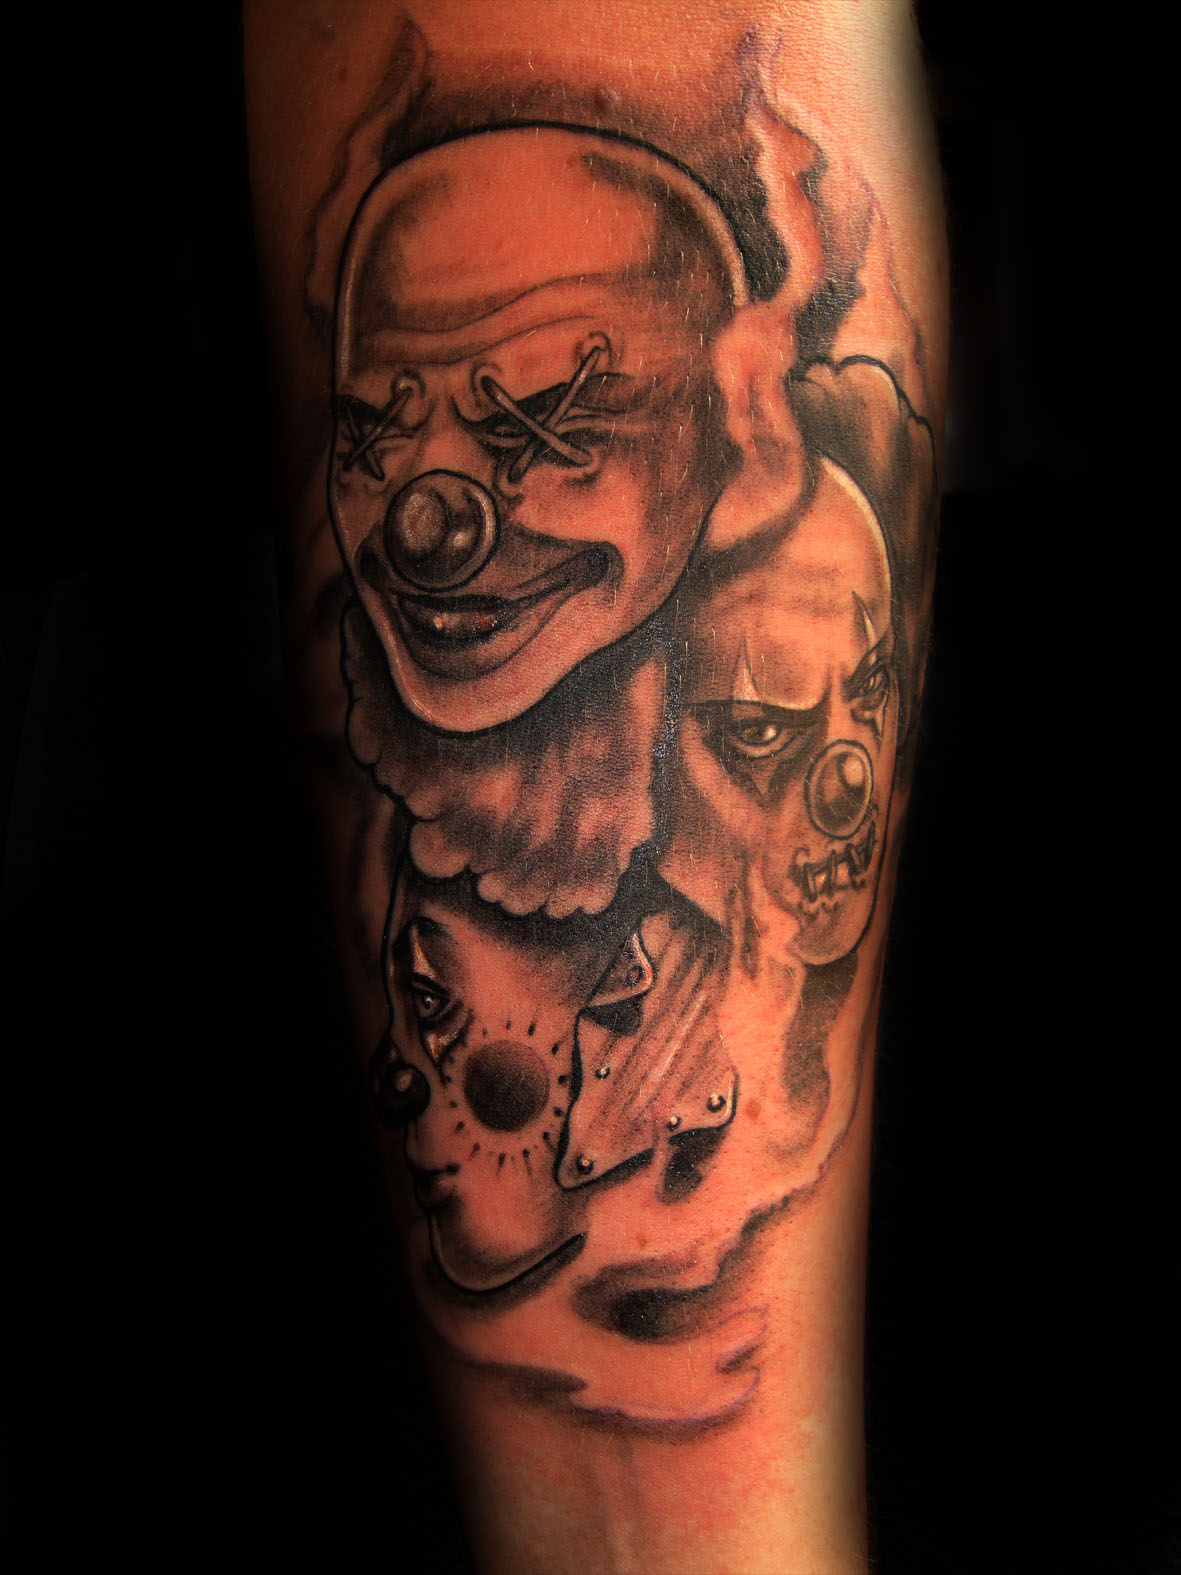 The Evil Clown Tattoos Meaning.